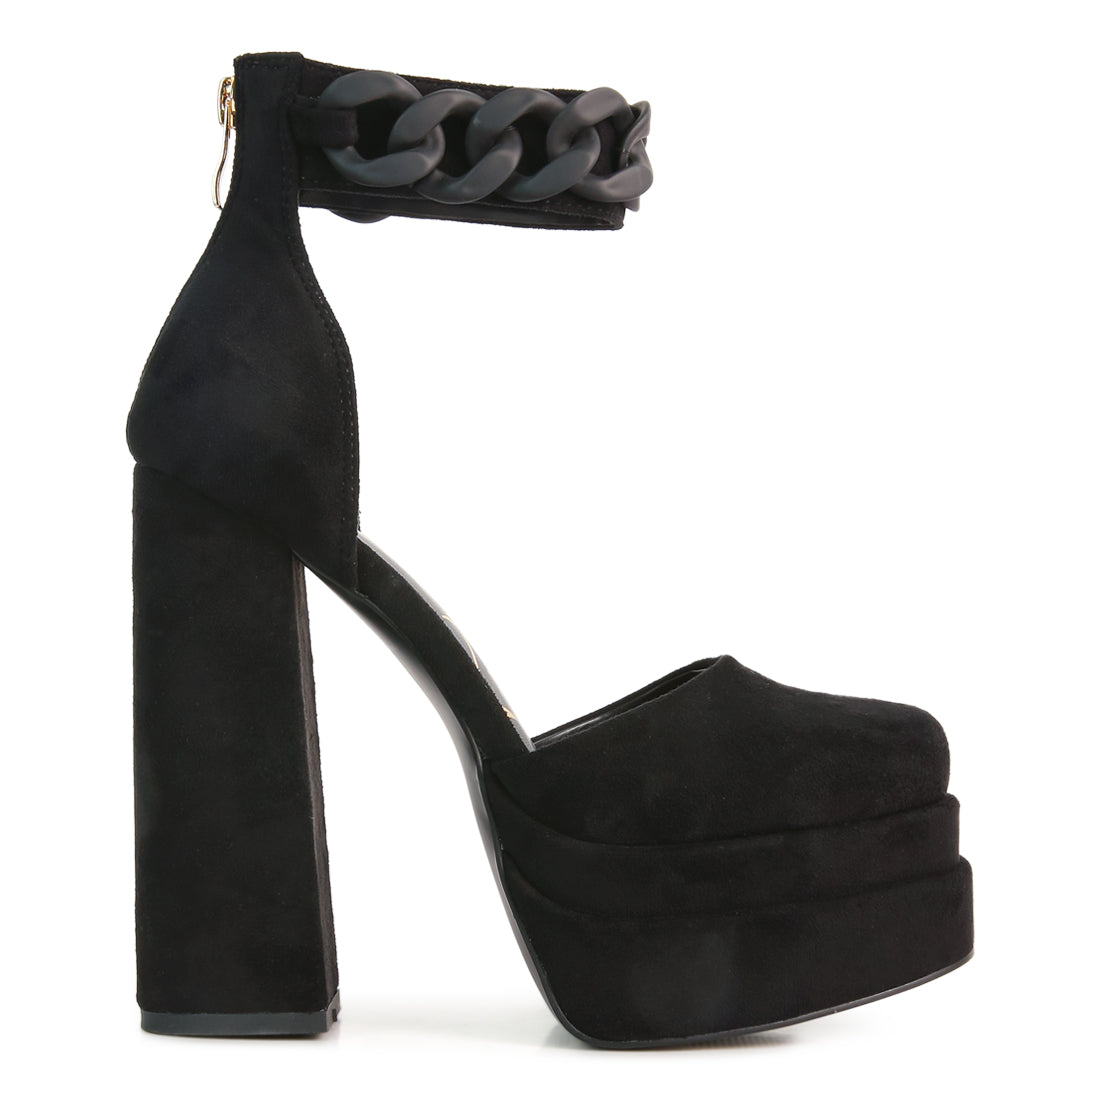 Black Showstoppe High Heeled Sandals